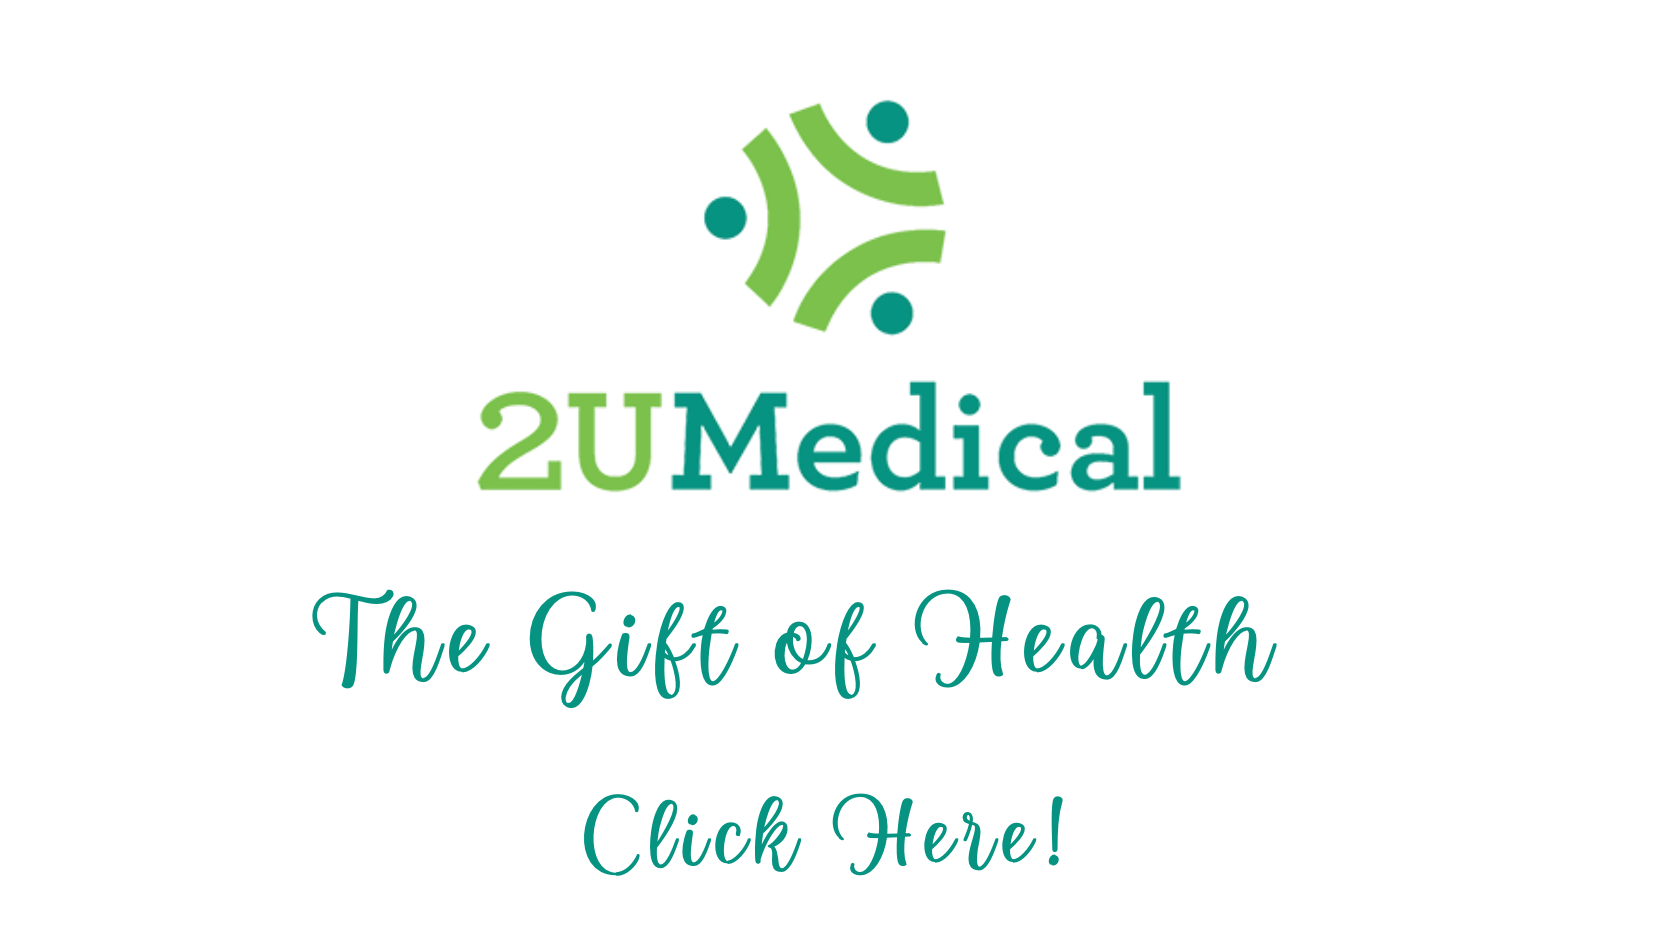 GIVE THE GIFT OF HEALTH